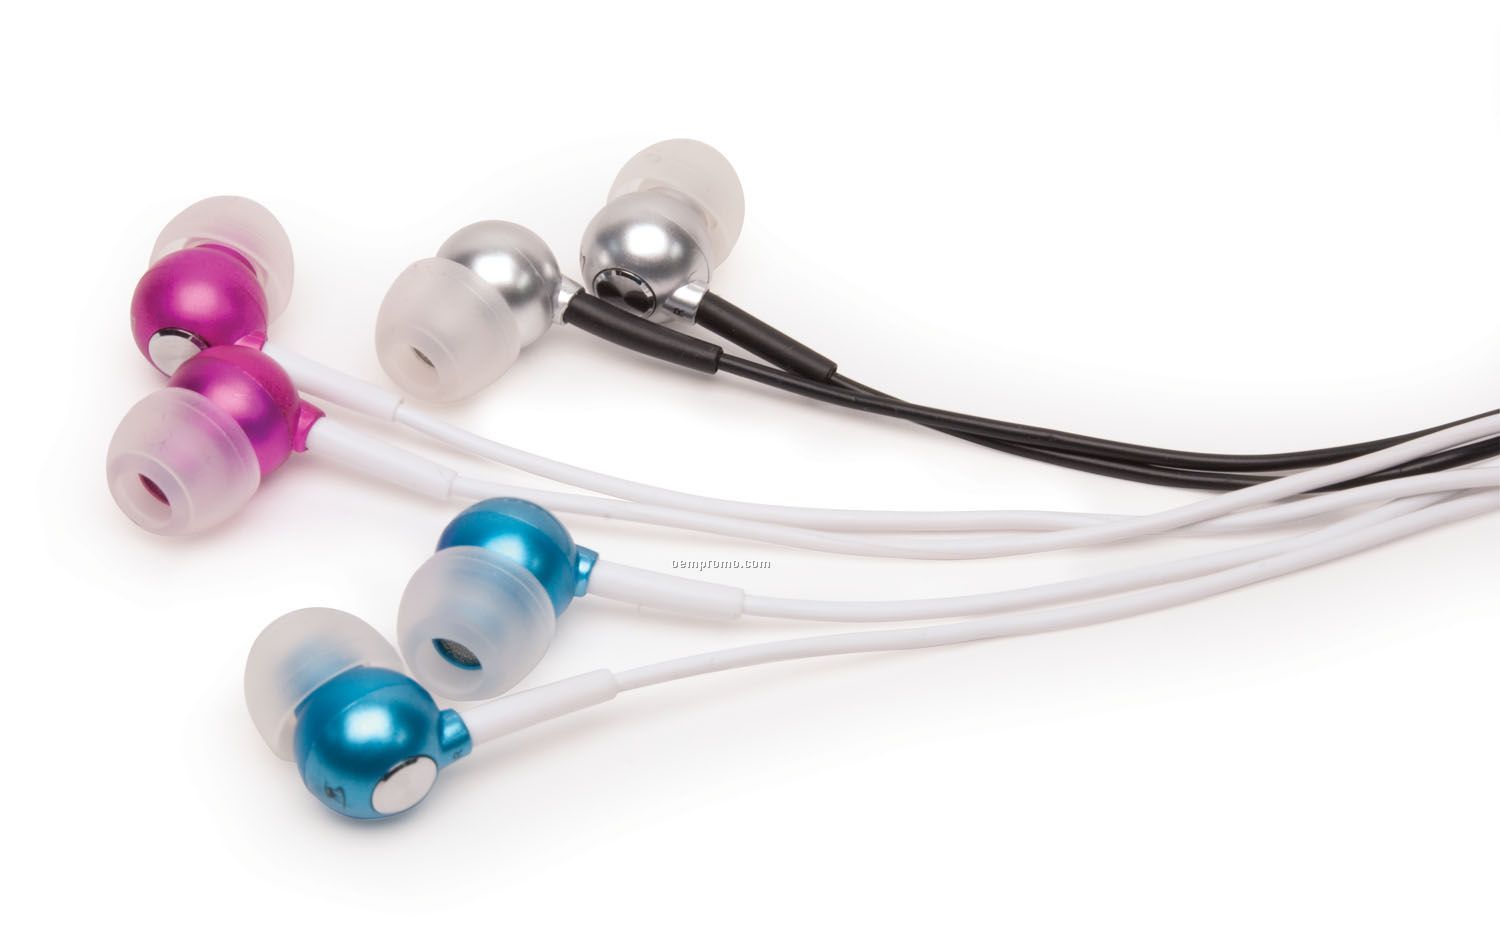 In-ear Earbud Headphone For Ipod Mp3 Players With 3.5 Mm Plug